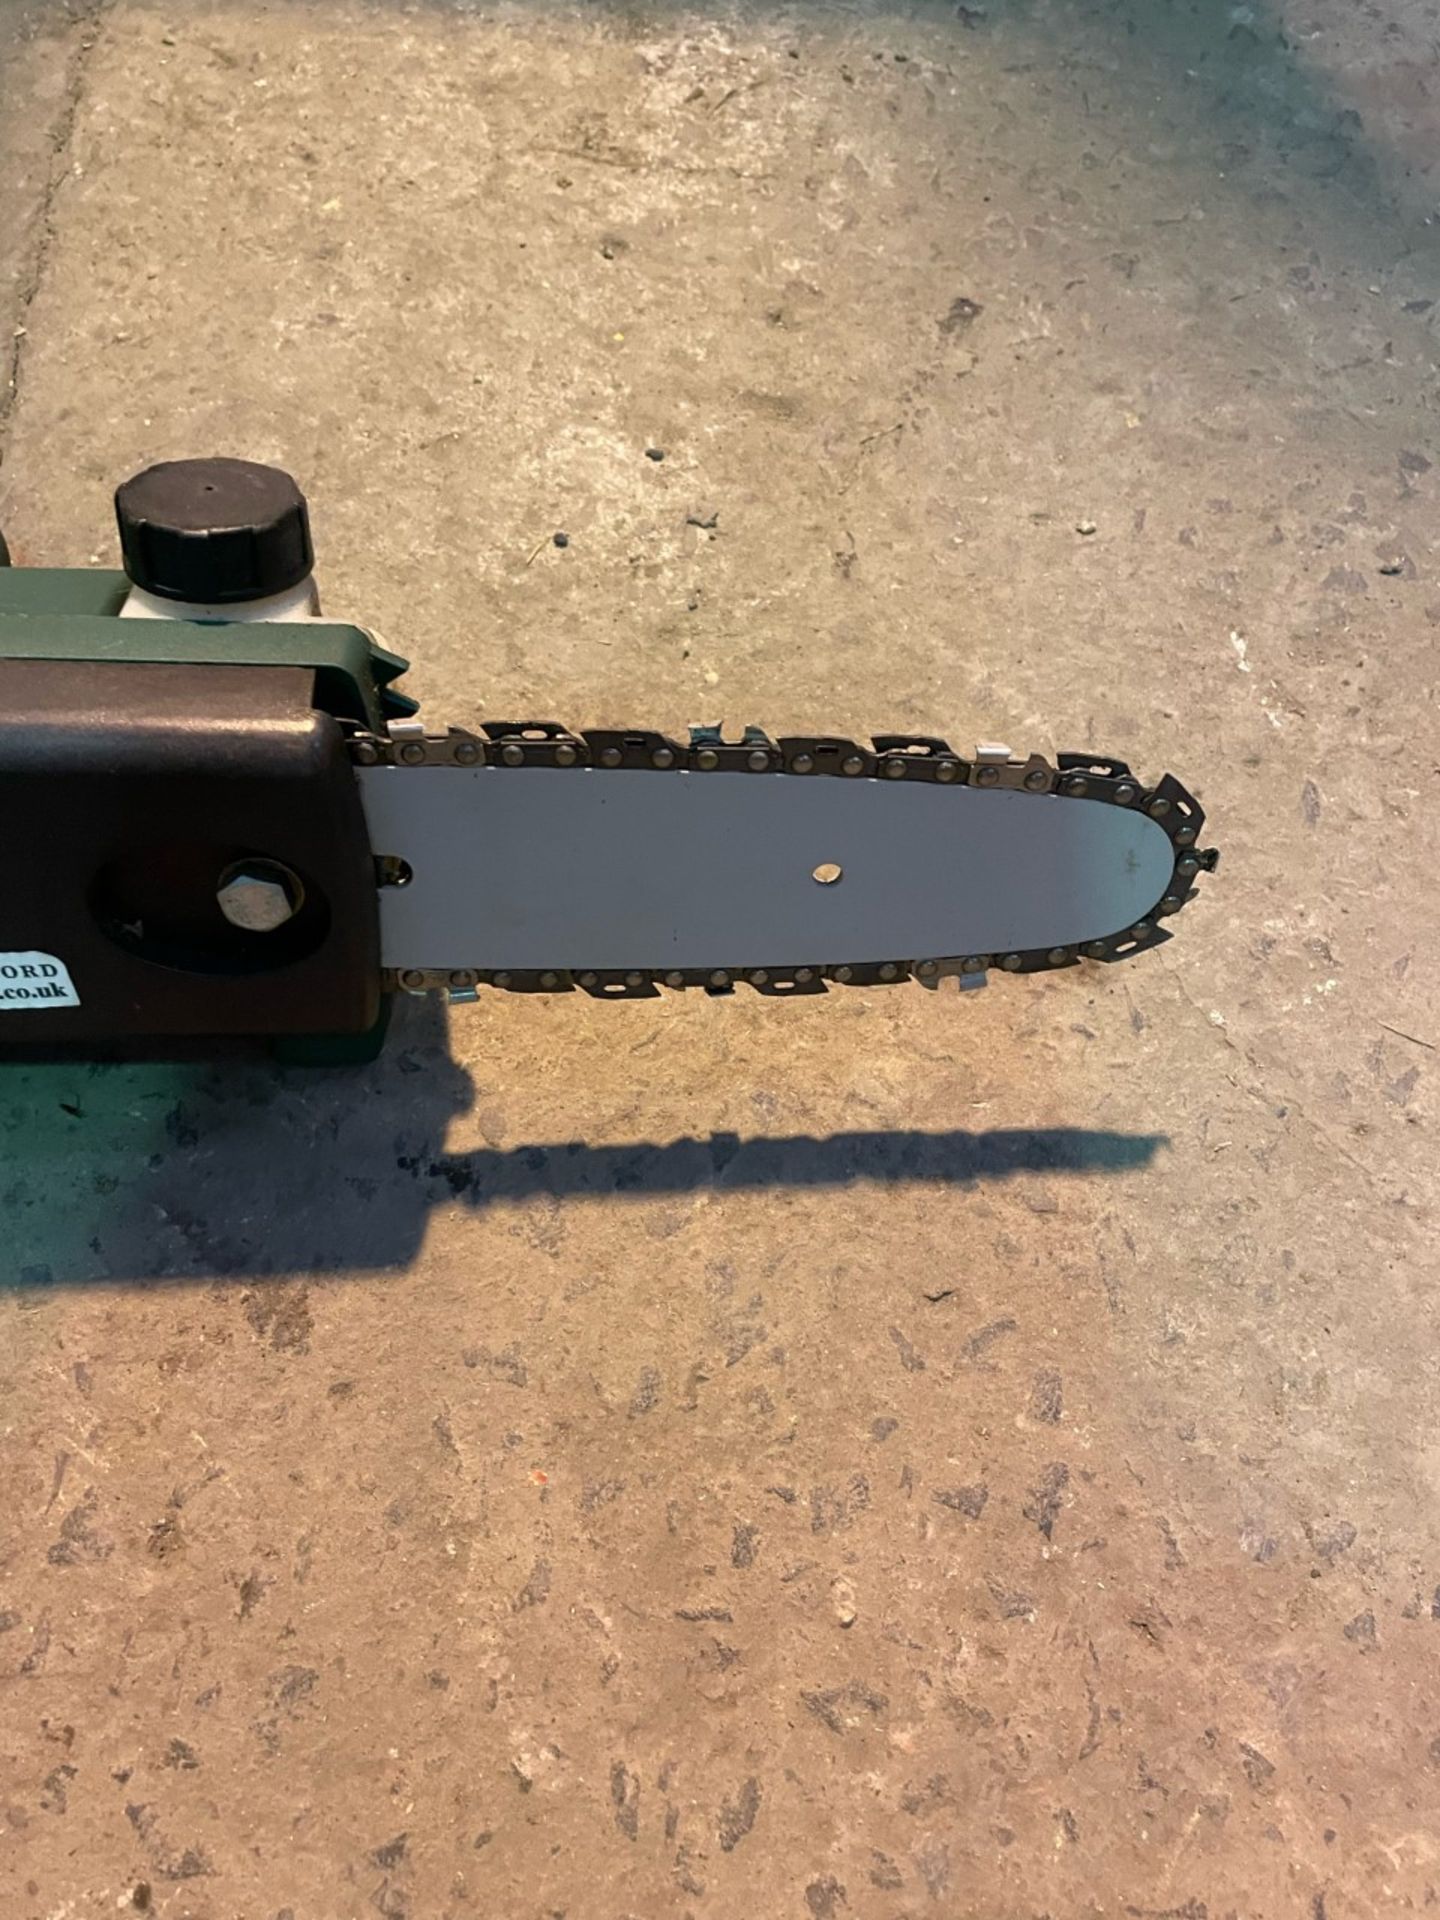 Coopers battery powered pole saw. No charger good condition - Image 3 of 3